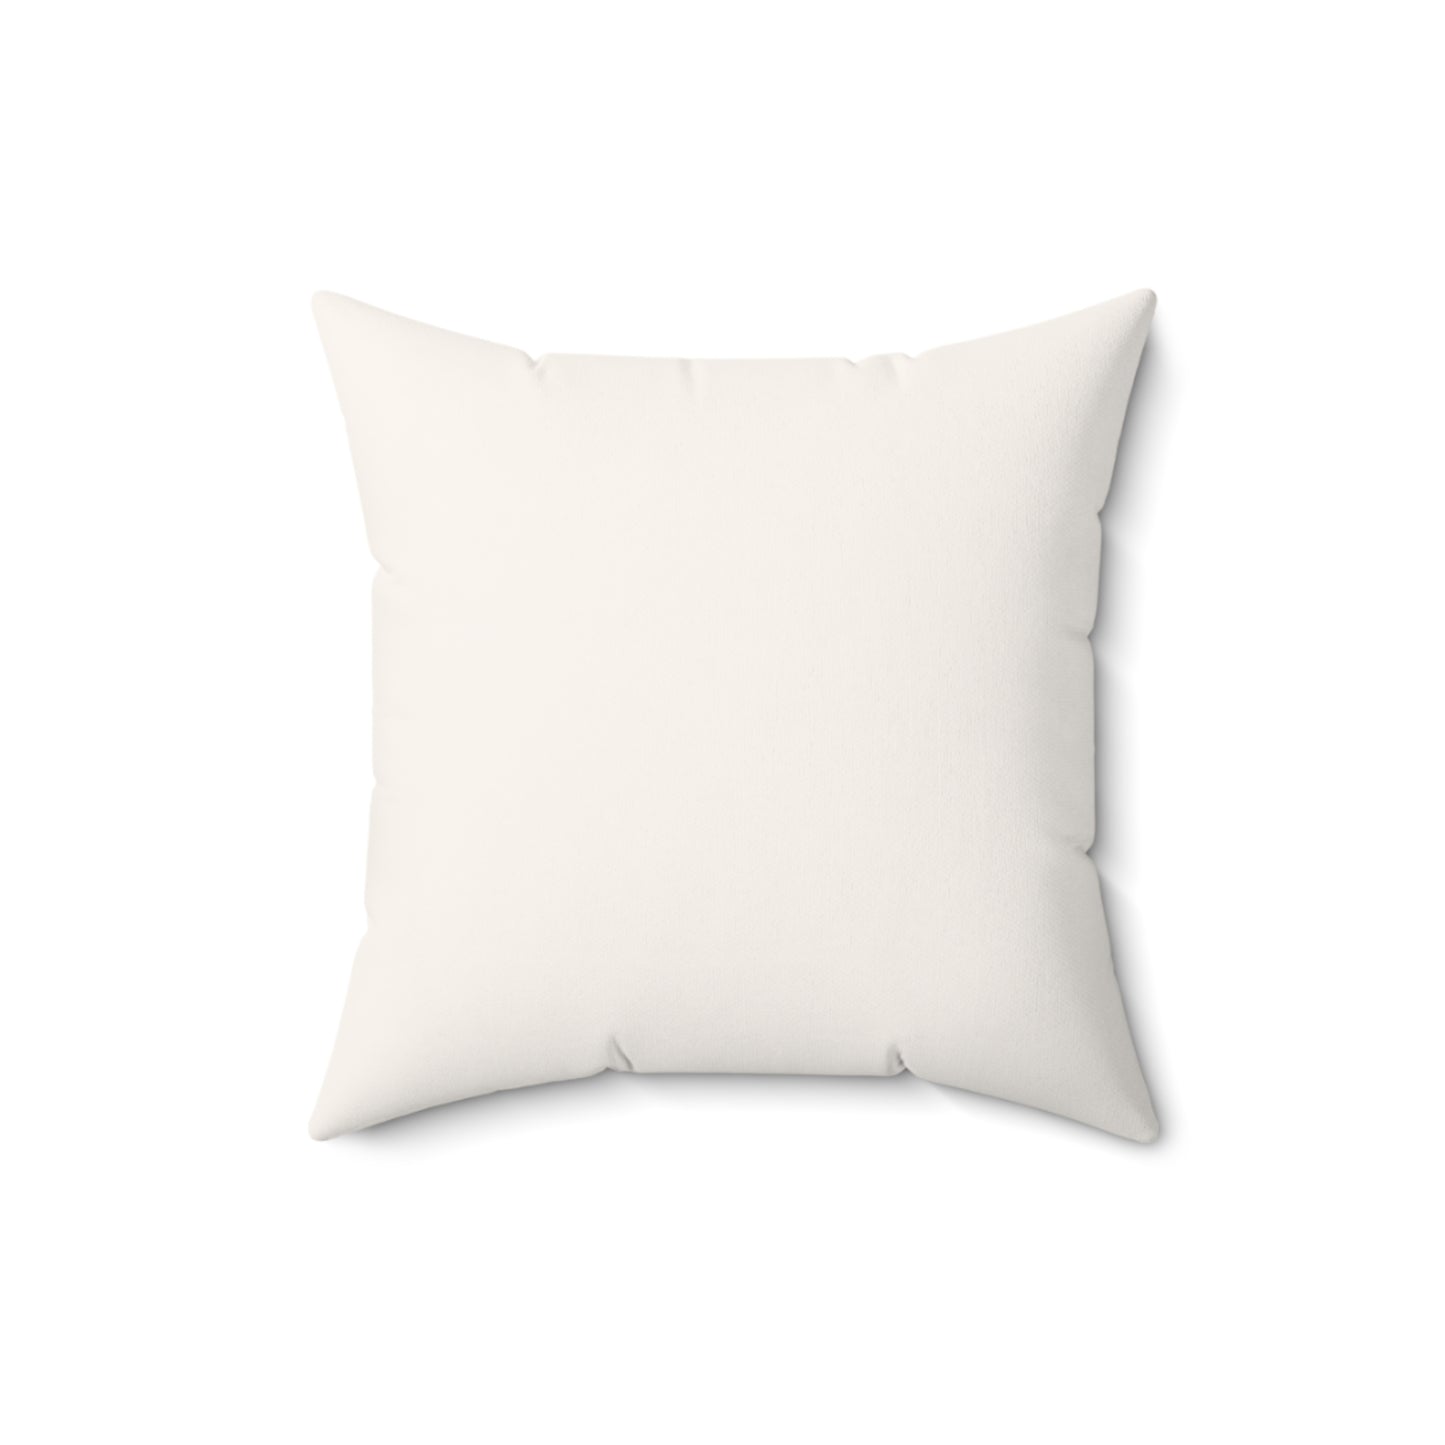 Together is Our Favorite Place to Be Faux Suede Square Pillow Print